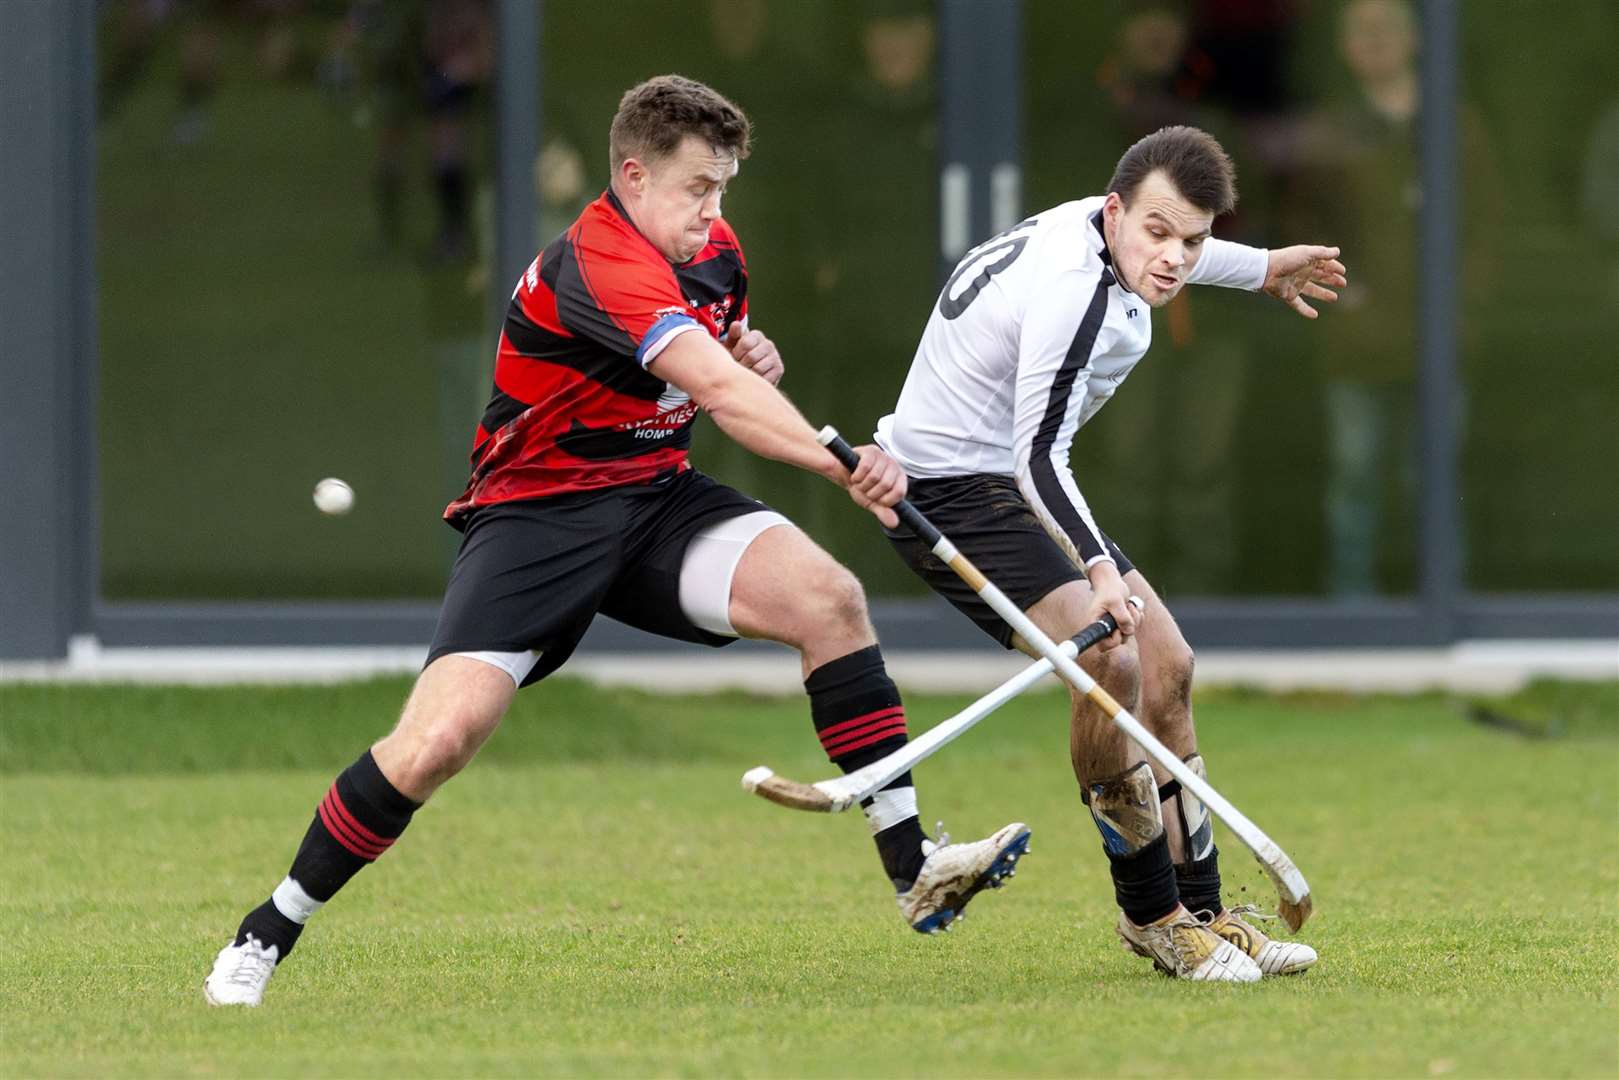 All shinty league and cup competitions cancelled for 2020.